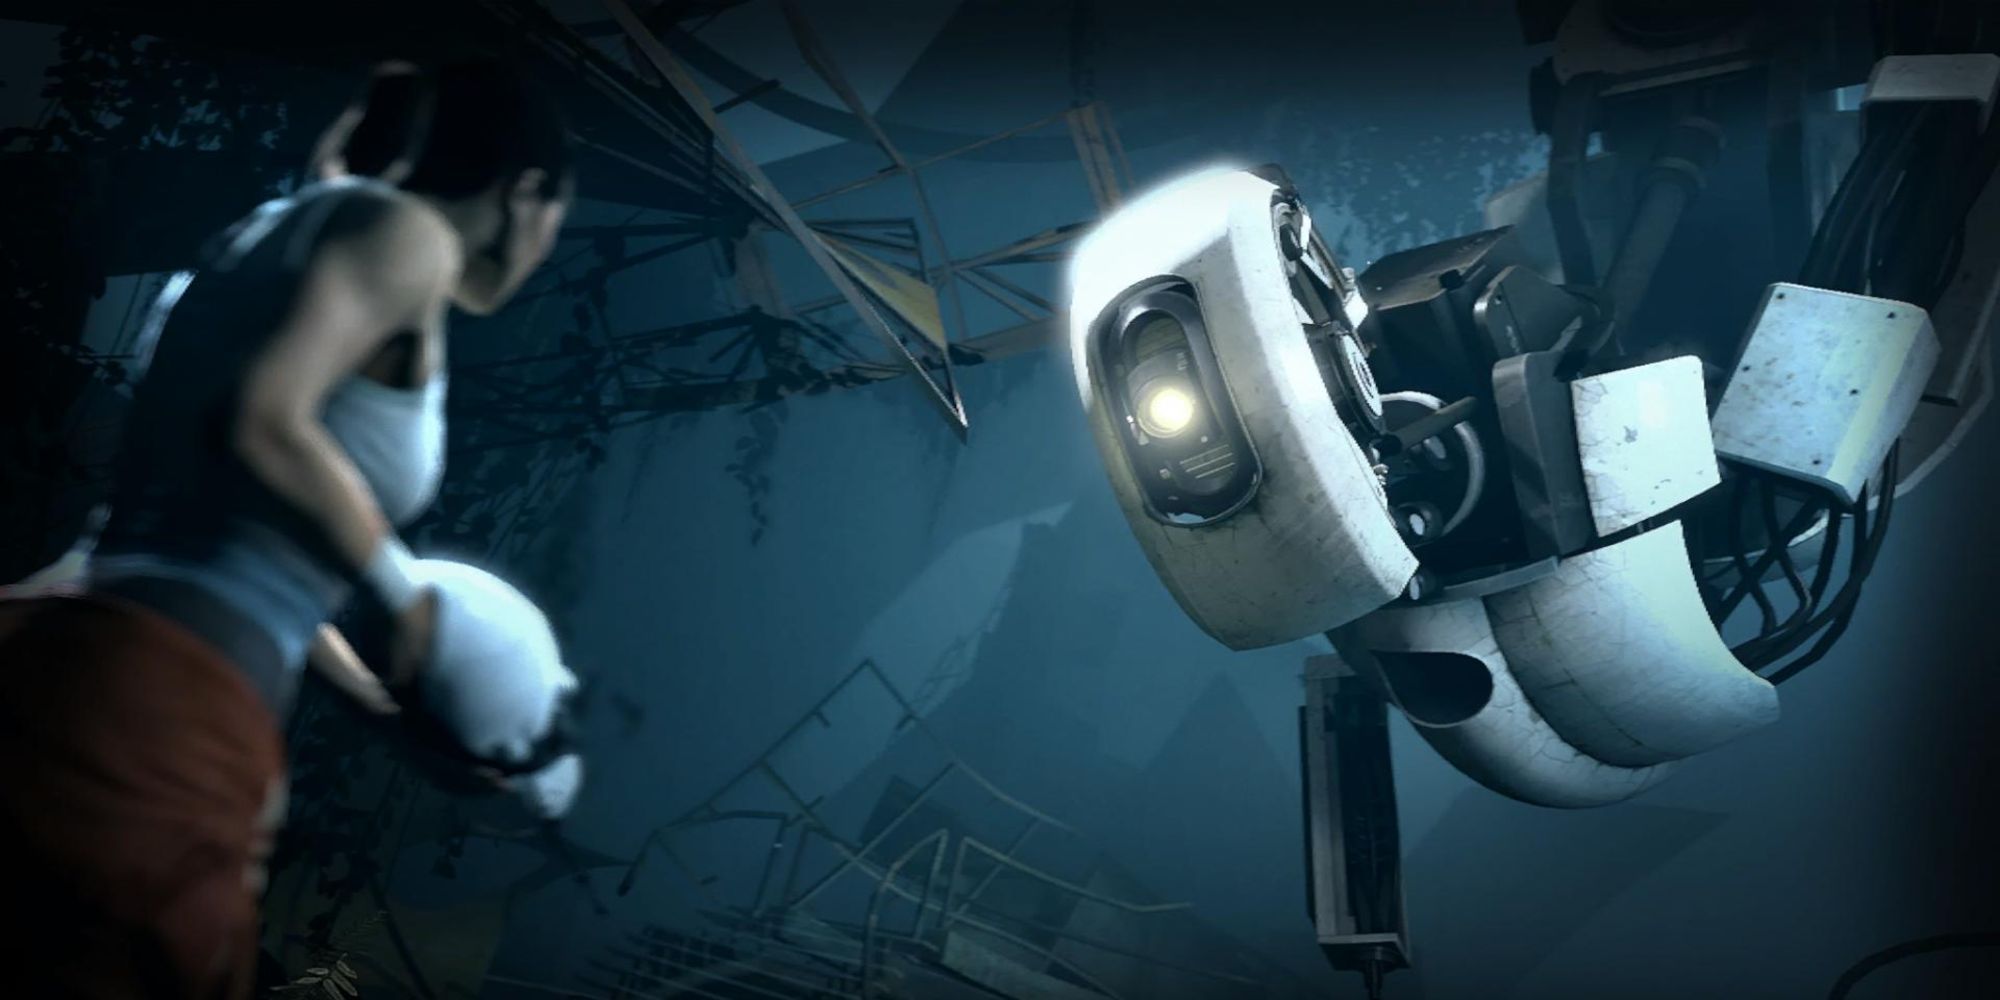 poster for Portal featuring the main characters GLaDOS and Chell